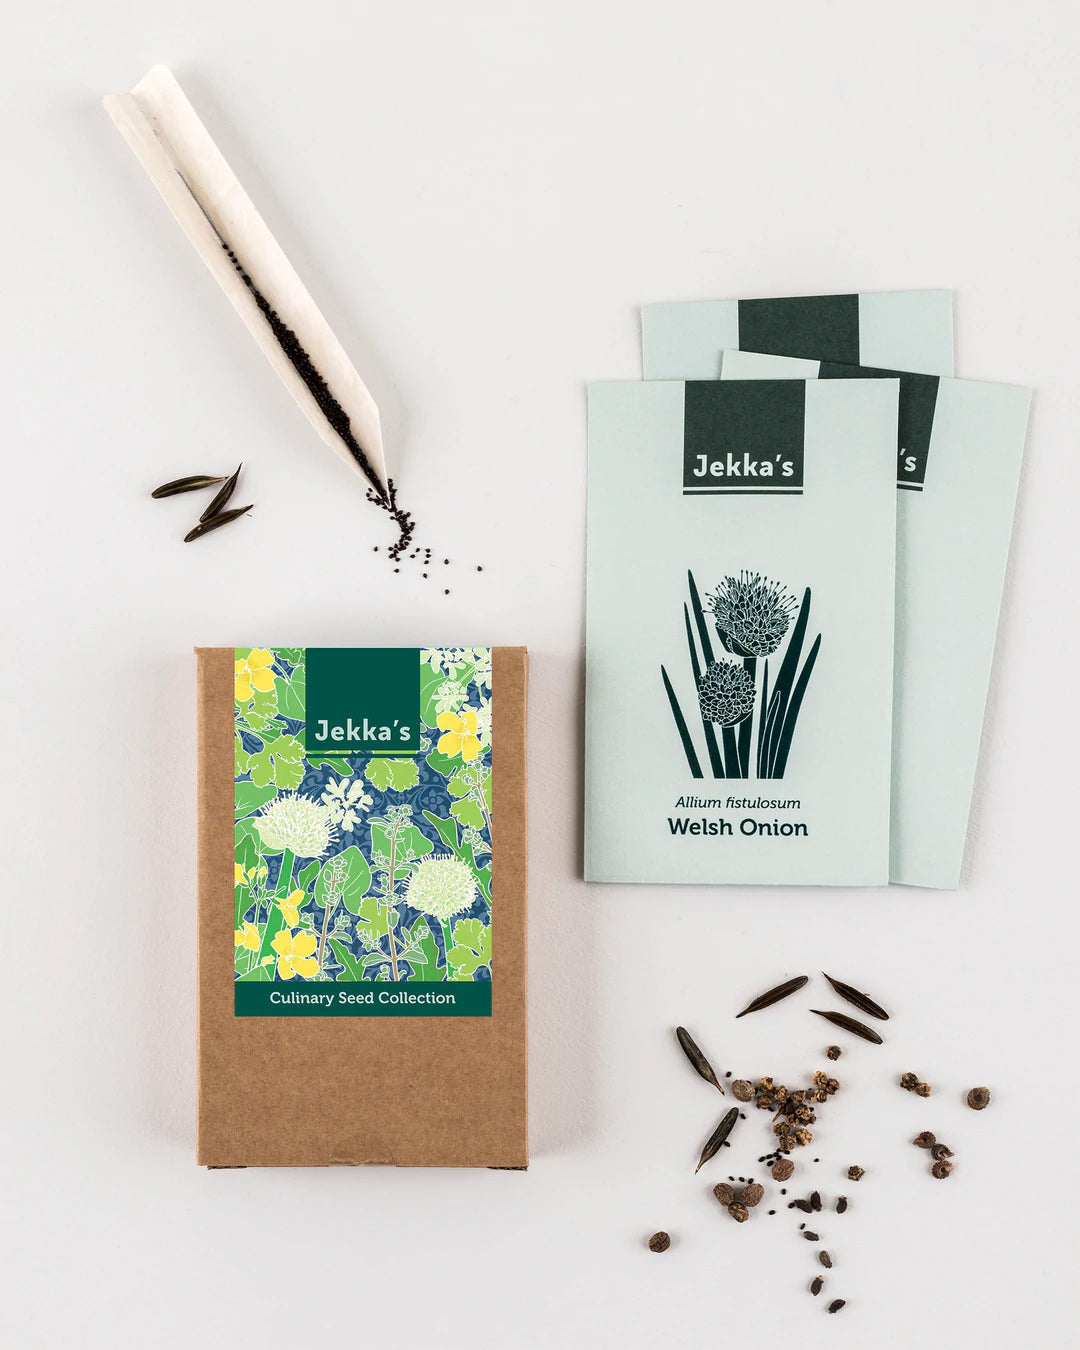 Jekka’s Culinary Seed Collection - THE BRISTOL ARTISAN